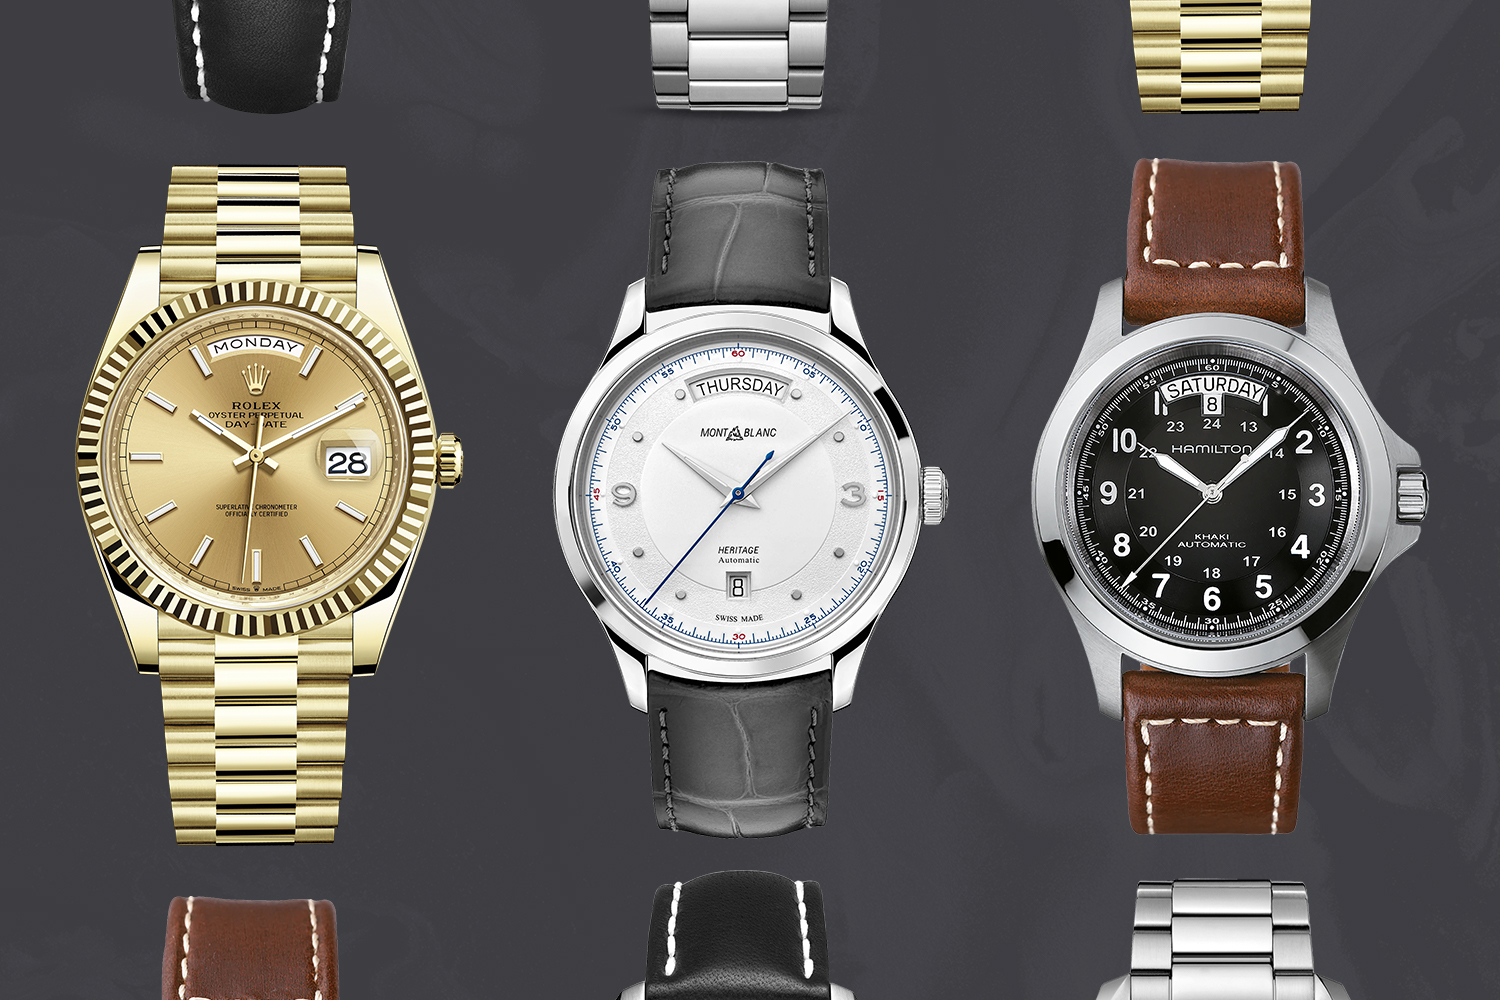 Day window watches from Rolex, Montblanc and Hamilton